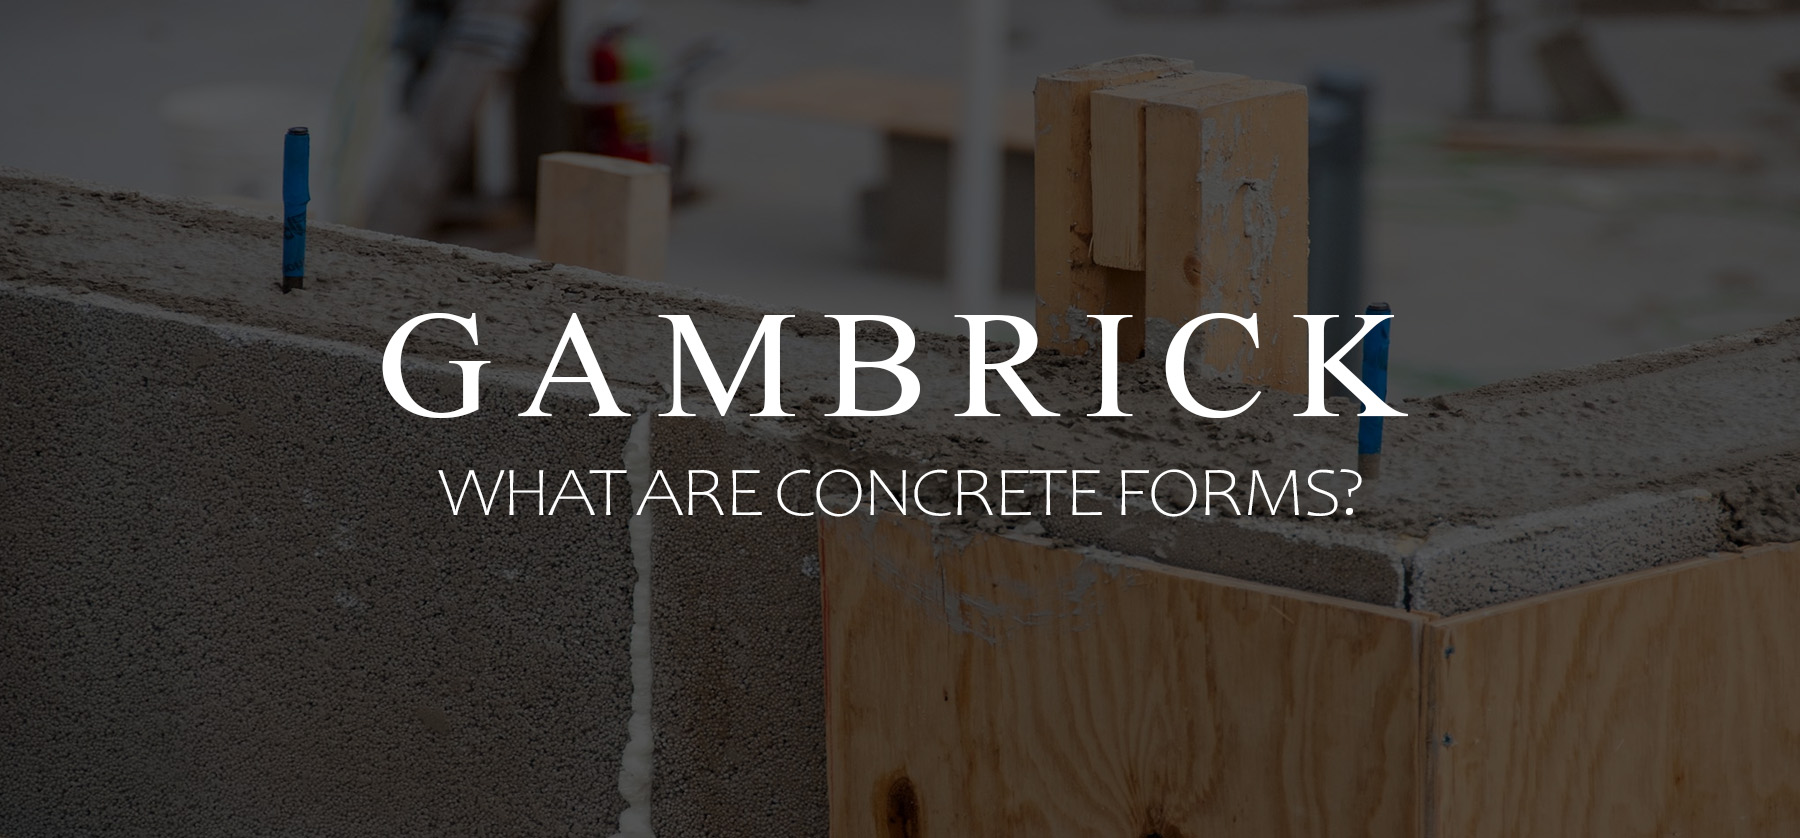 what are concrete forms banner 1